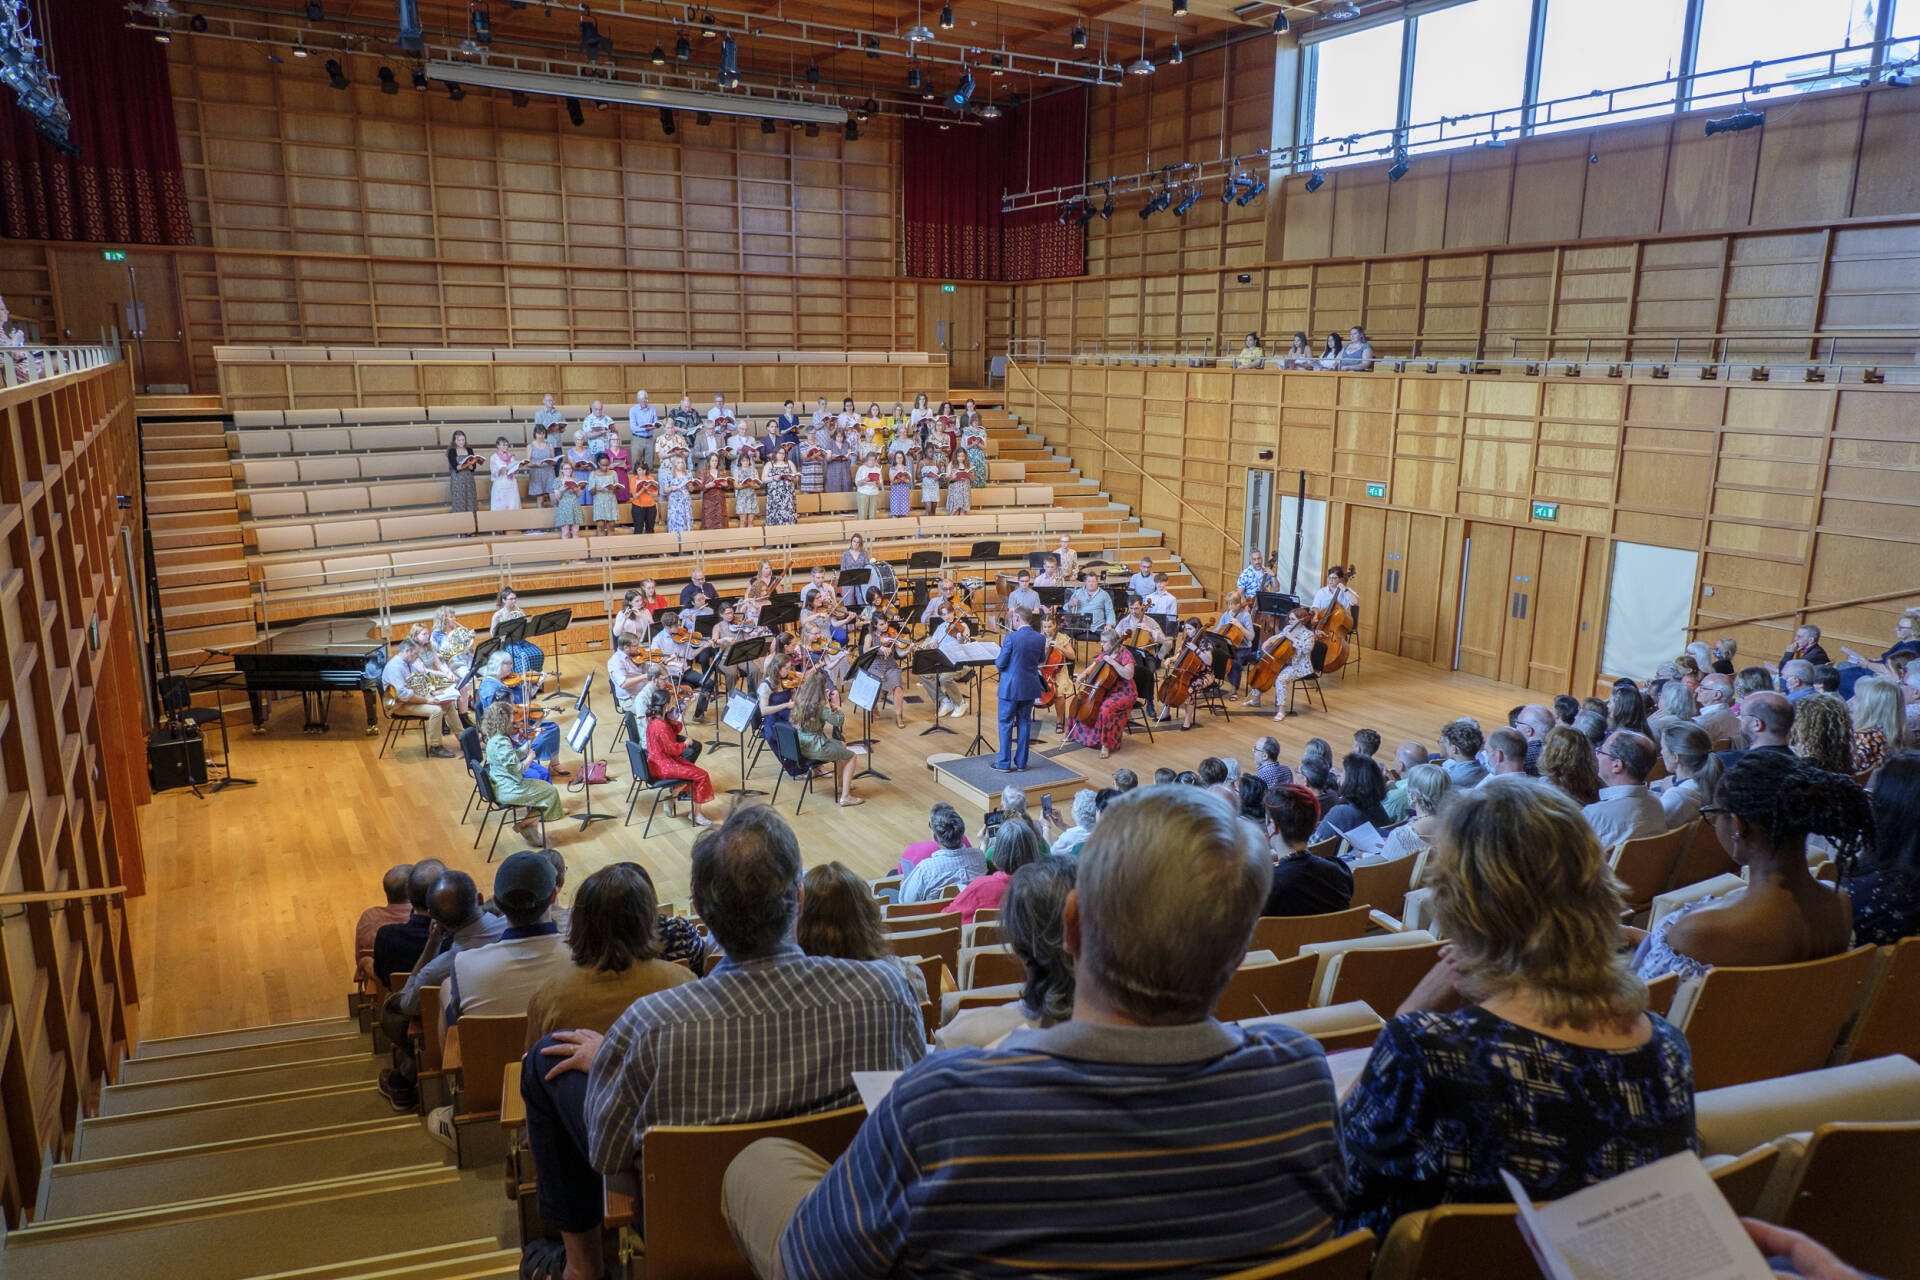 Group of orchestral players and a choir performing in a concert-hall, view from behind the audience